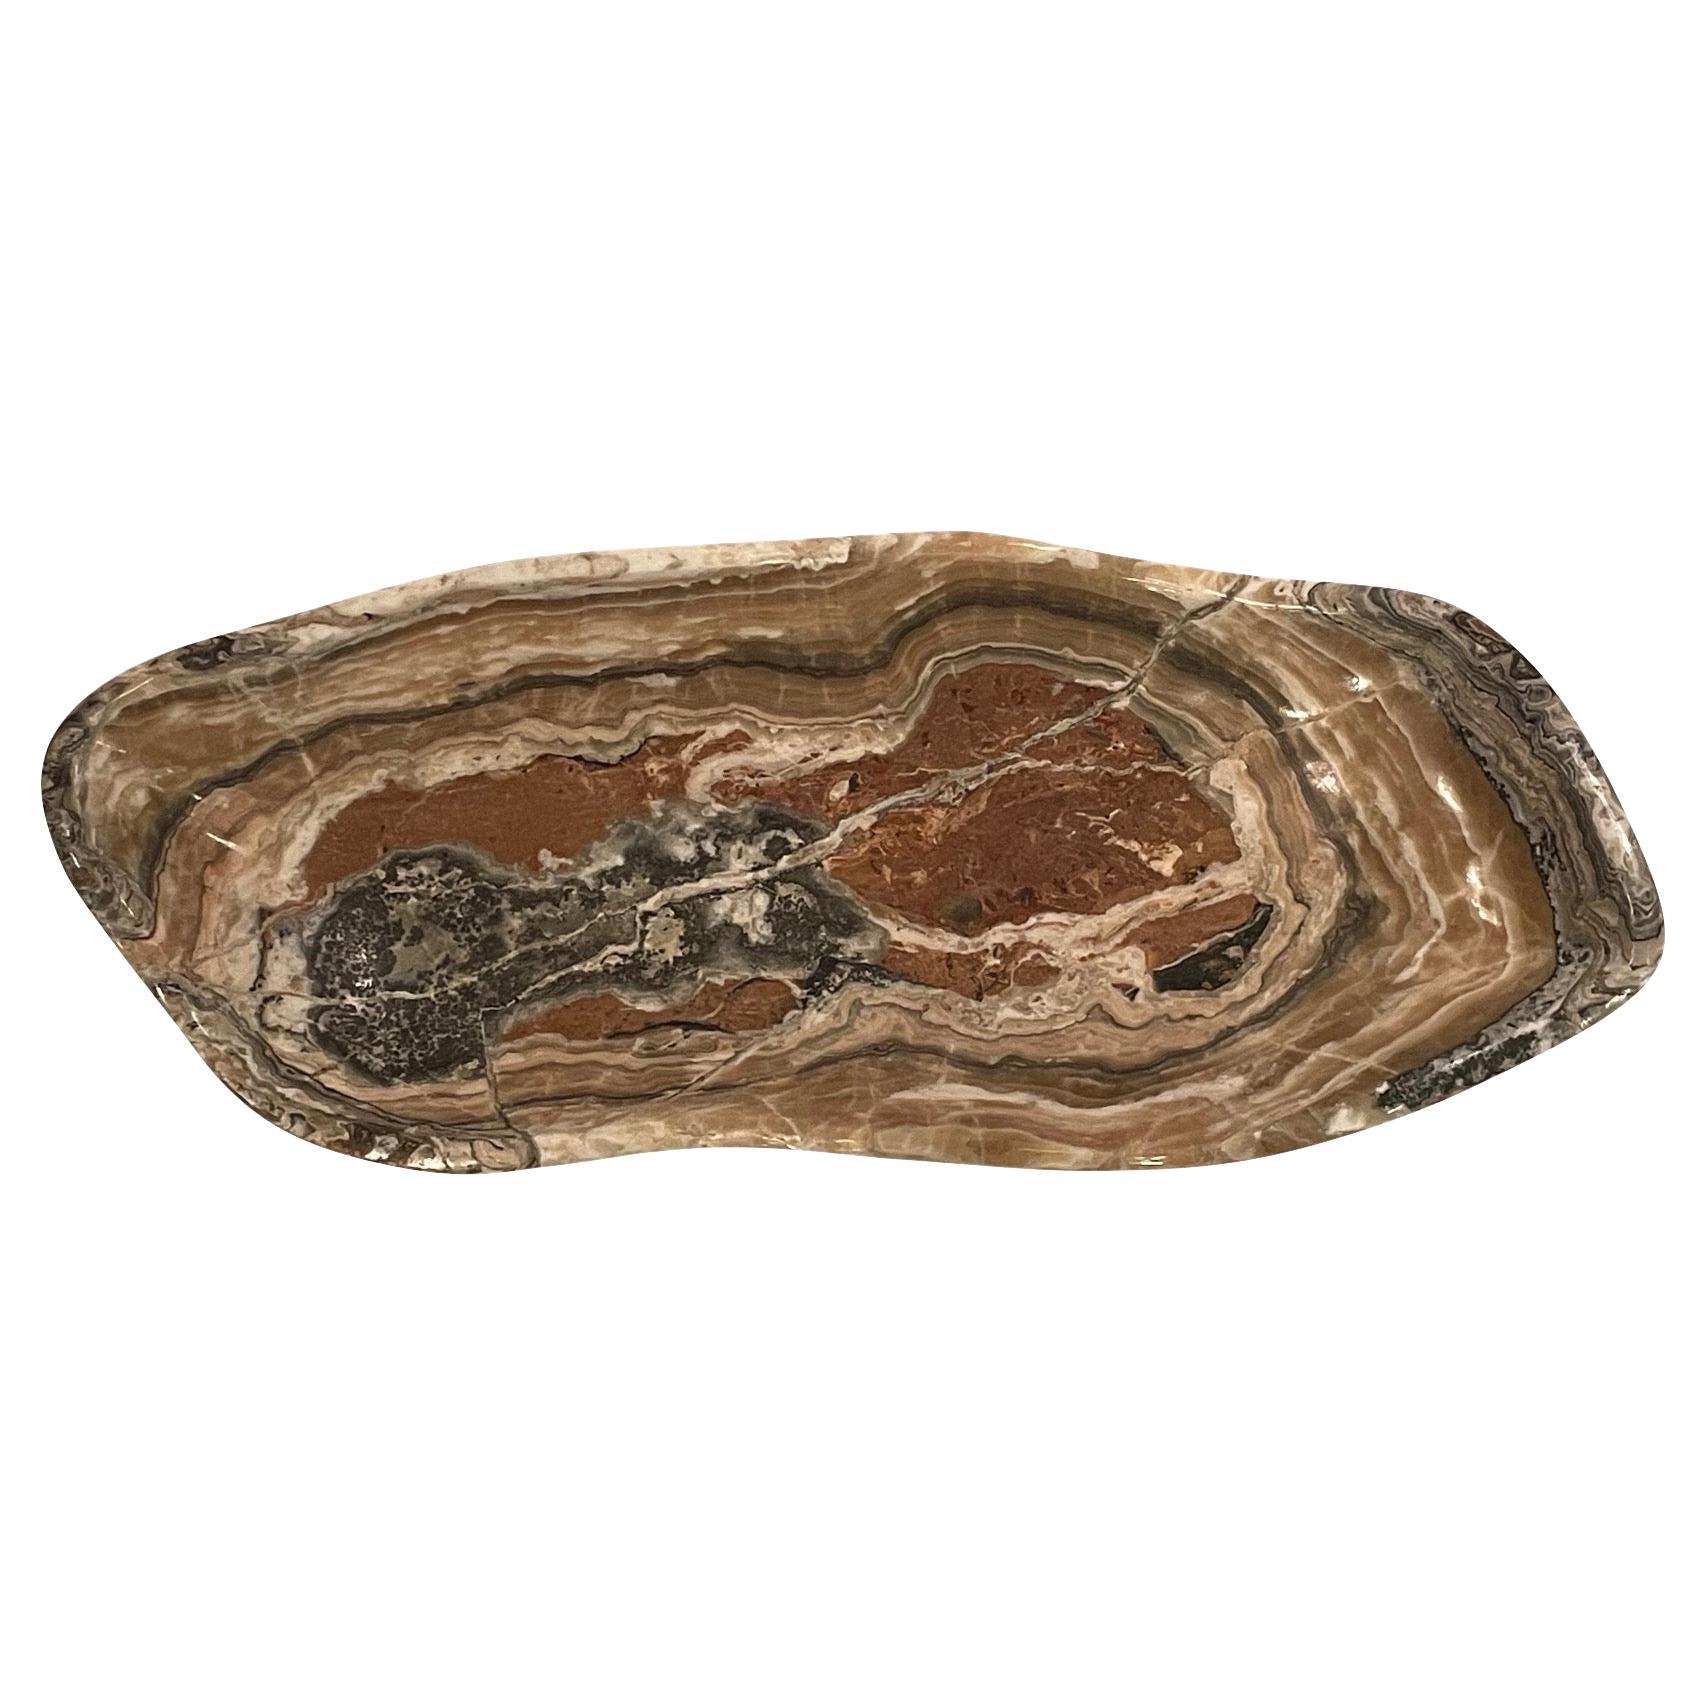 Contemporary Moroccan free form shaped onyx bowl.
Rust, grey and beige horizontal striped pattern.
Polished and smooth finish.
Rectangular shape.
Part of a large collection.